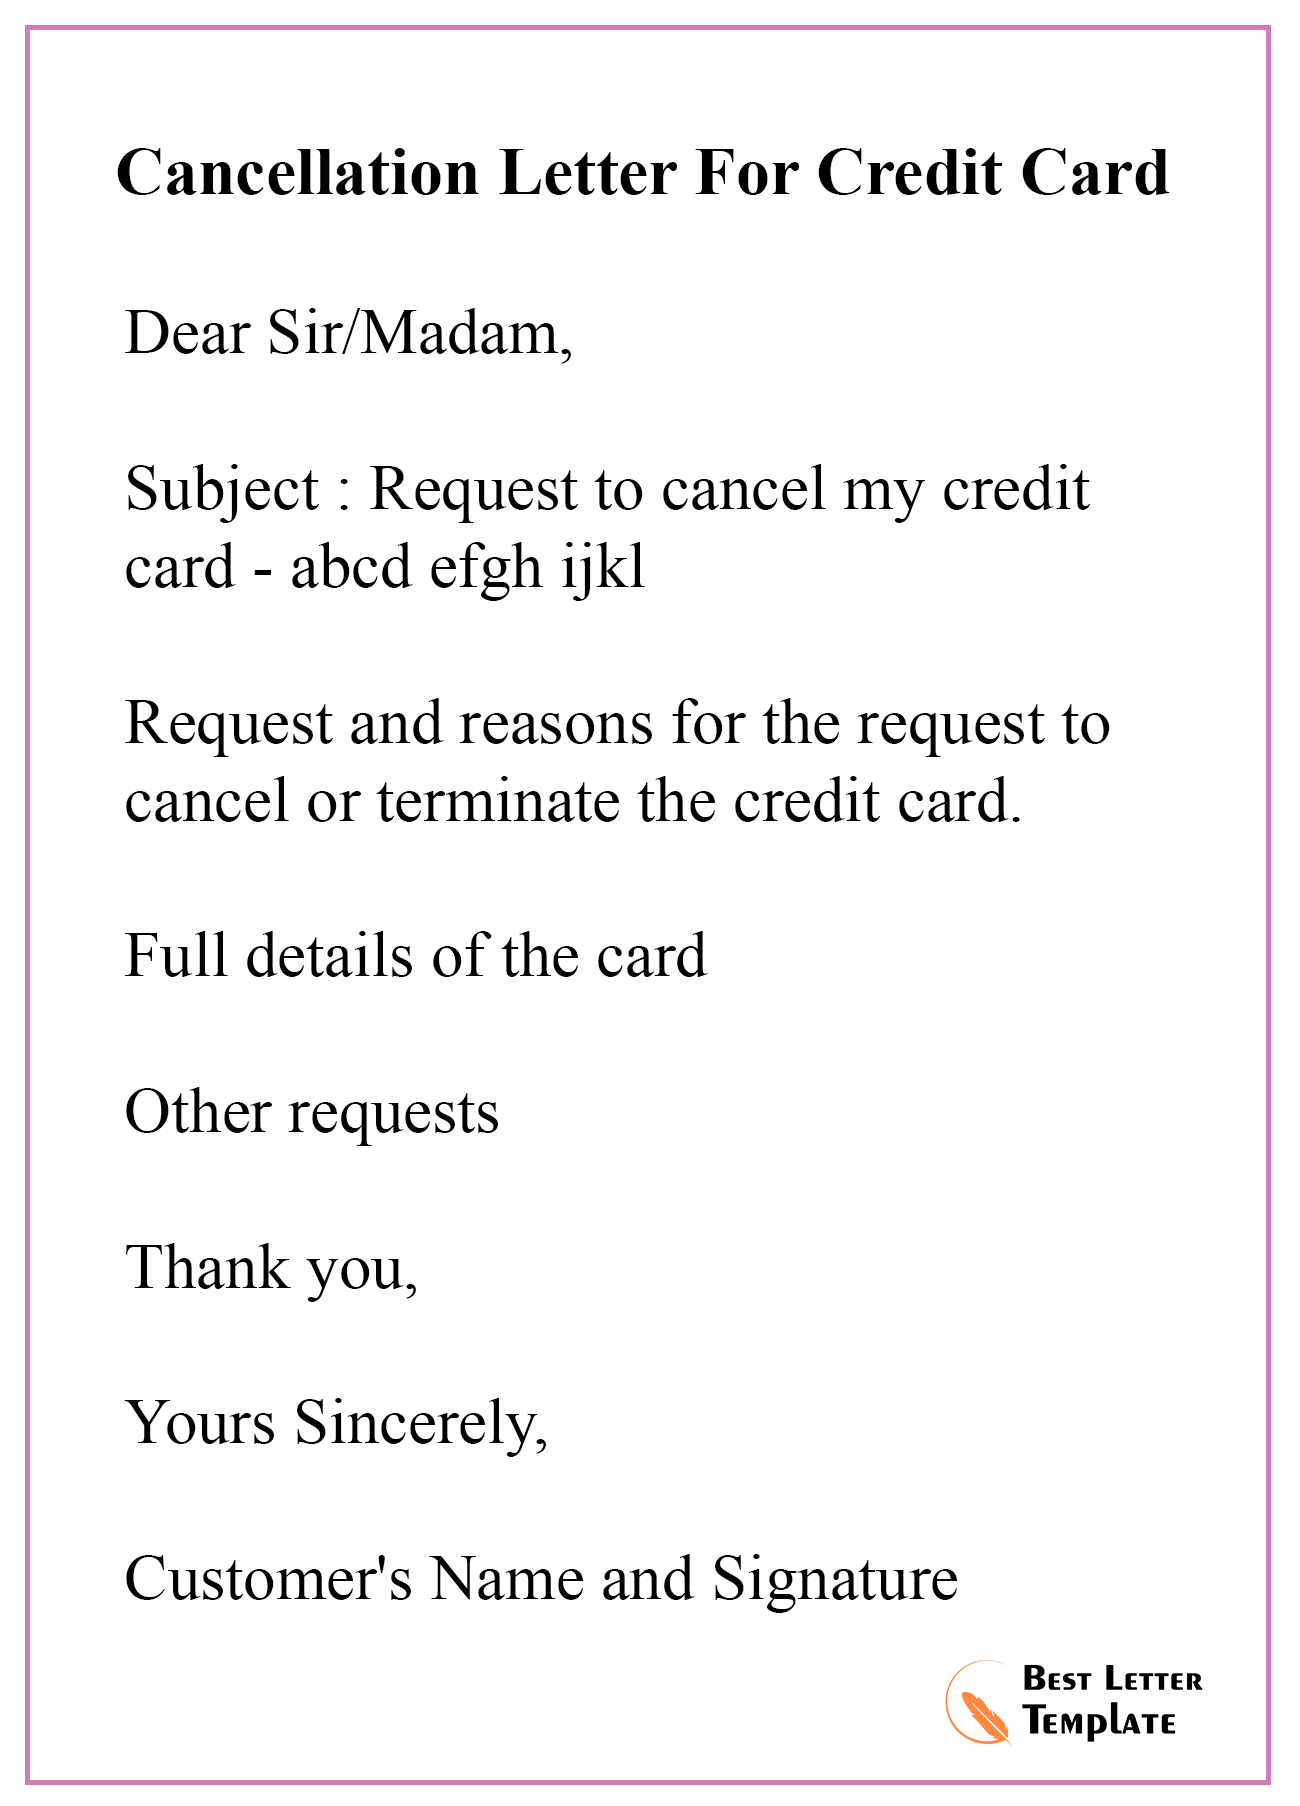 cancellation-letter-for-credit-card - Best Letter Template